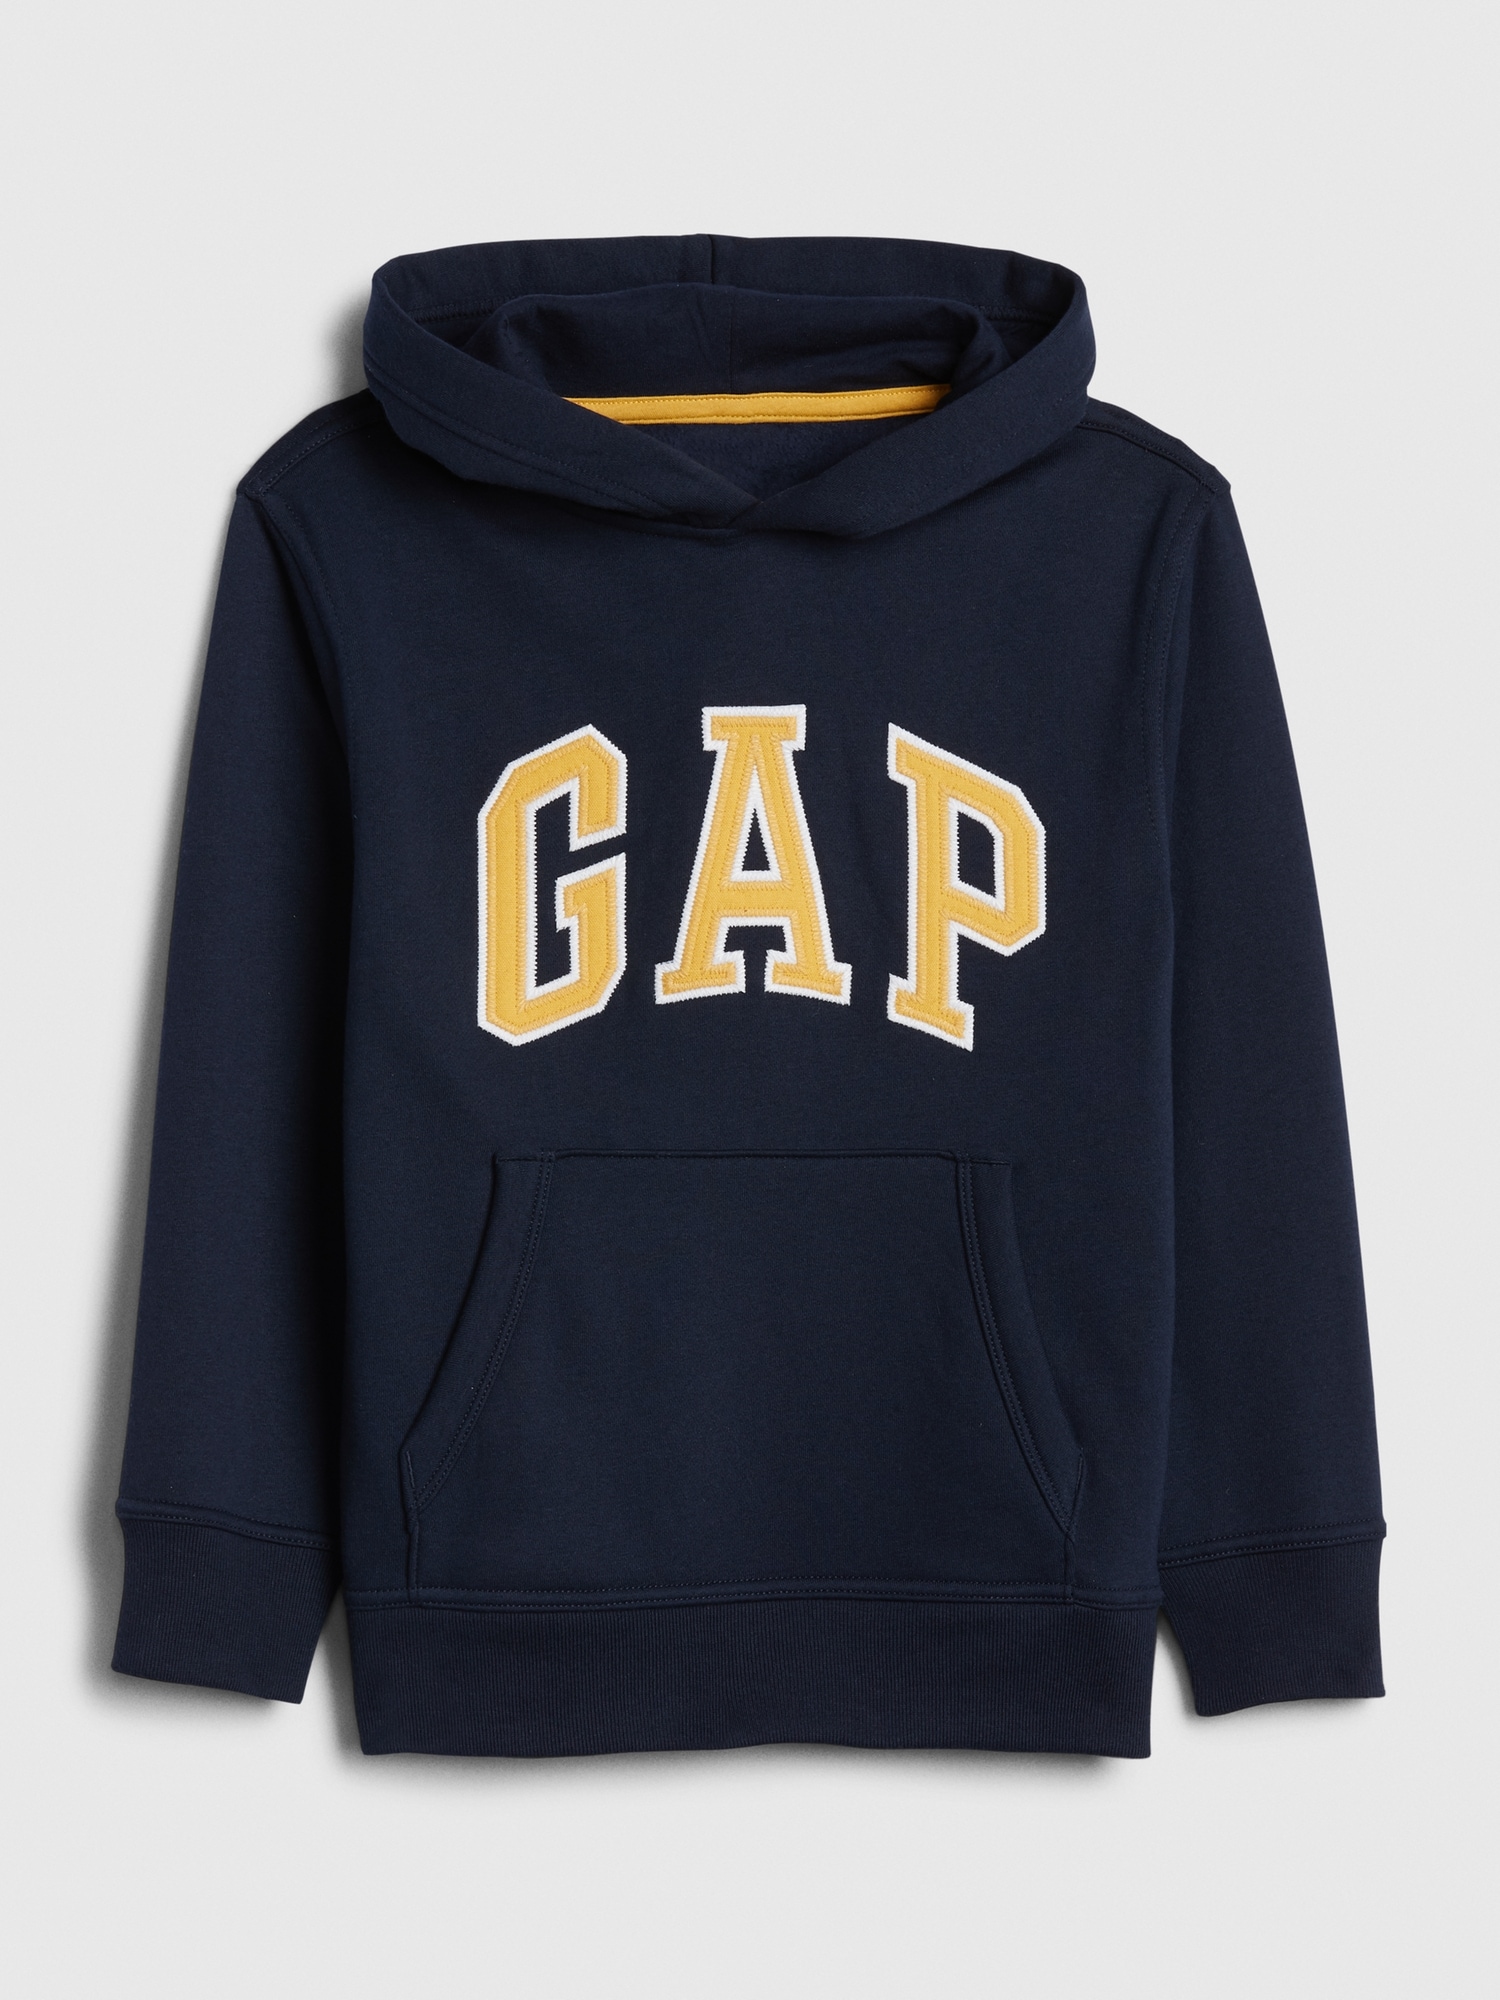 the gap coupons